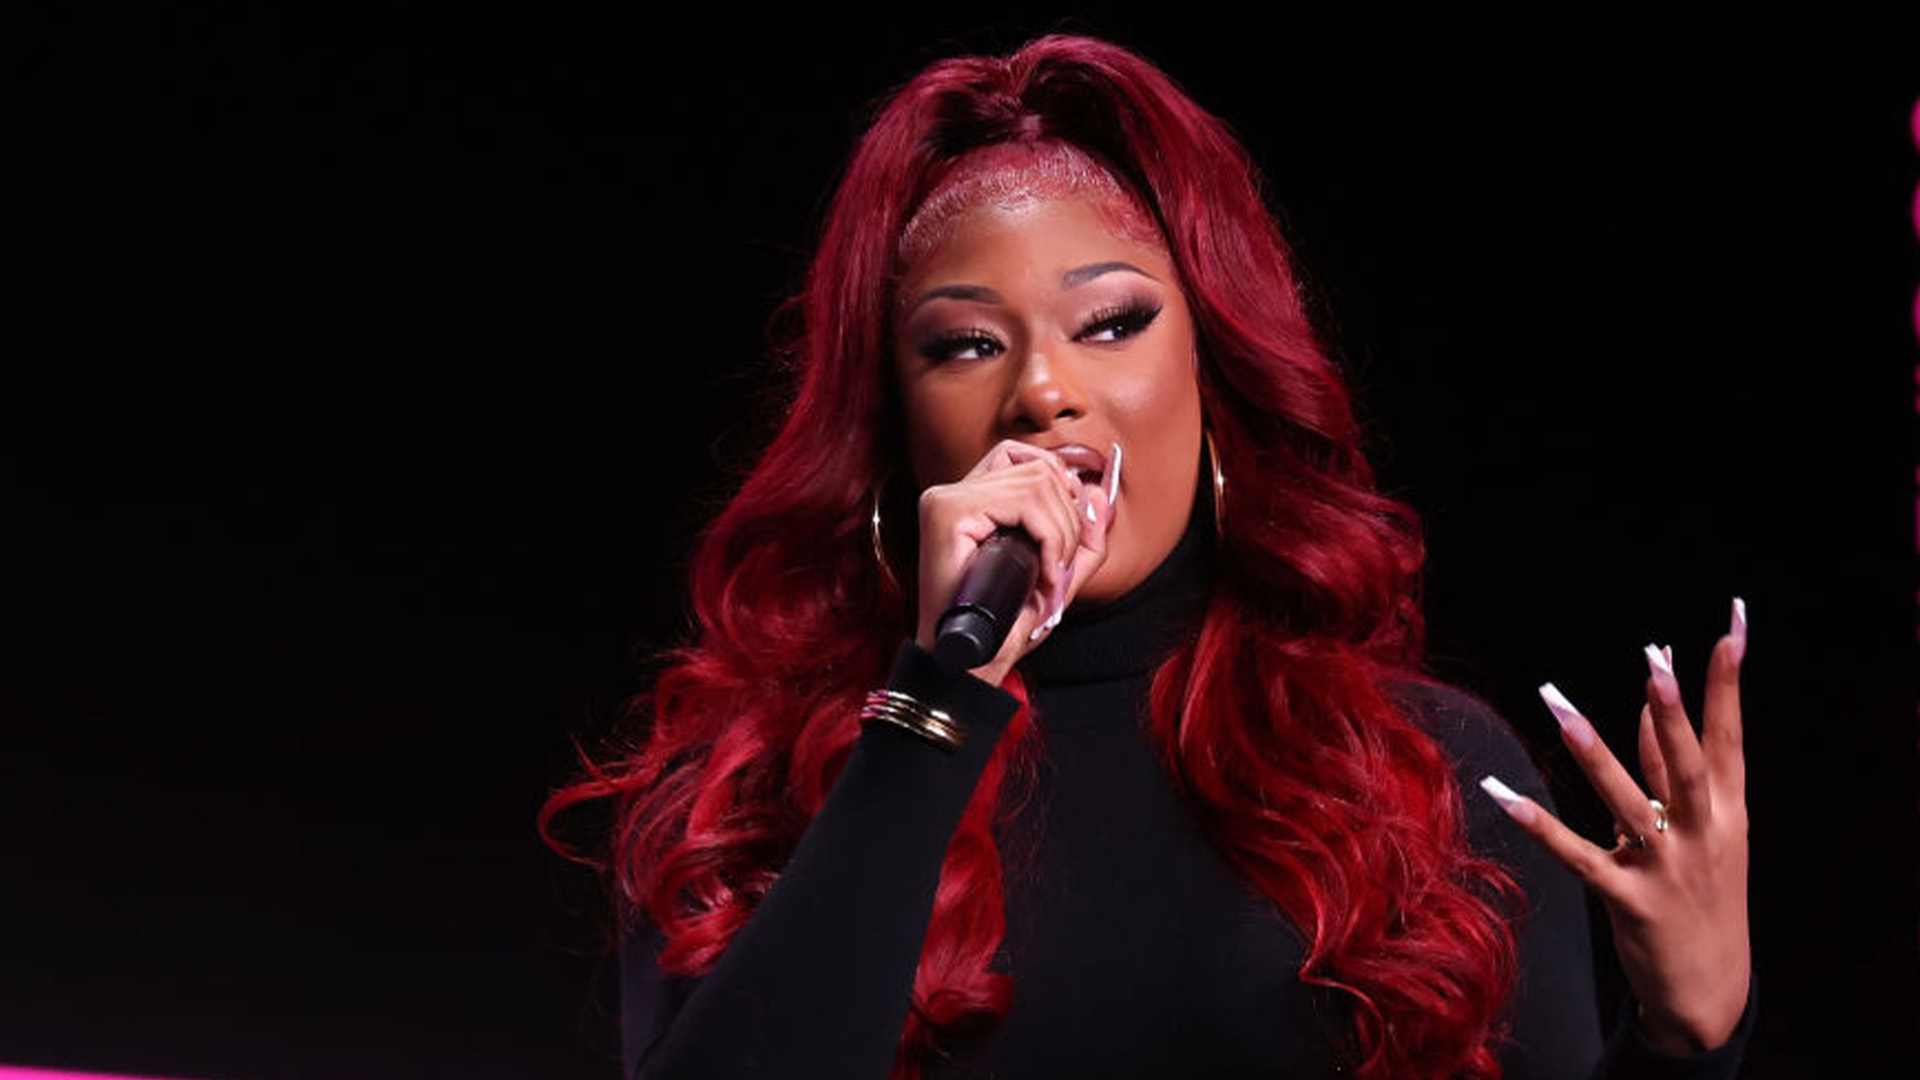 Megan Thee Stallion's Legal Team 'Exploring All Legal Options' Against Bloggers' Misinformation